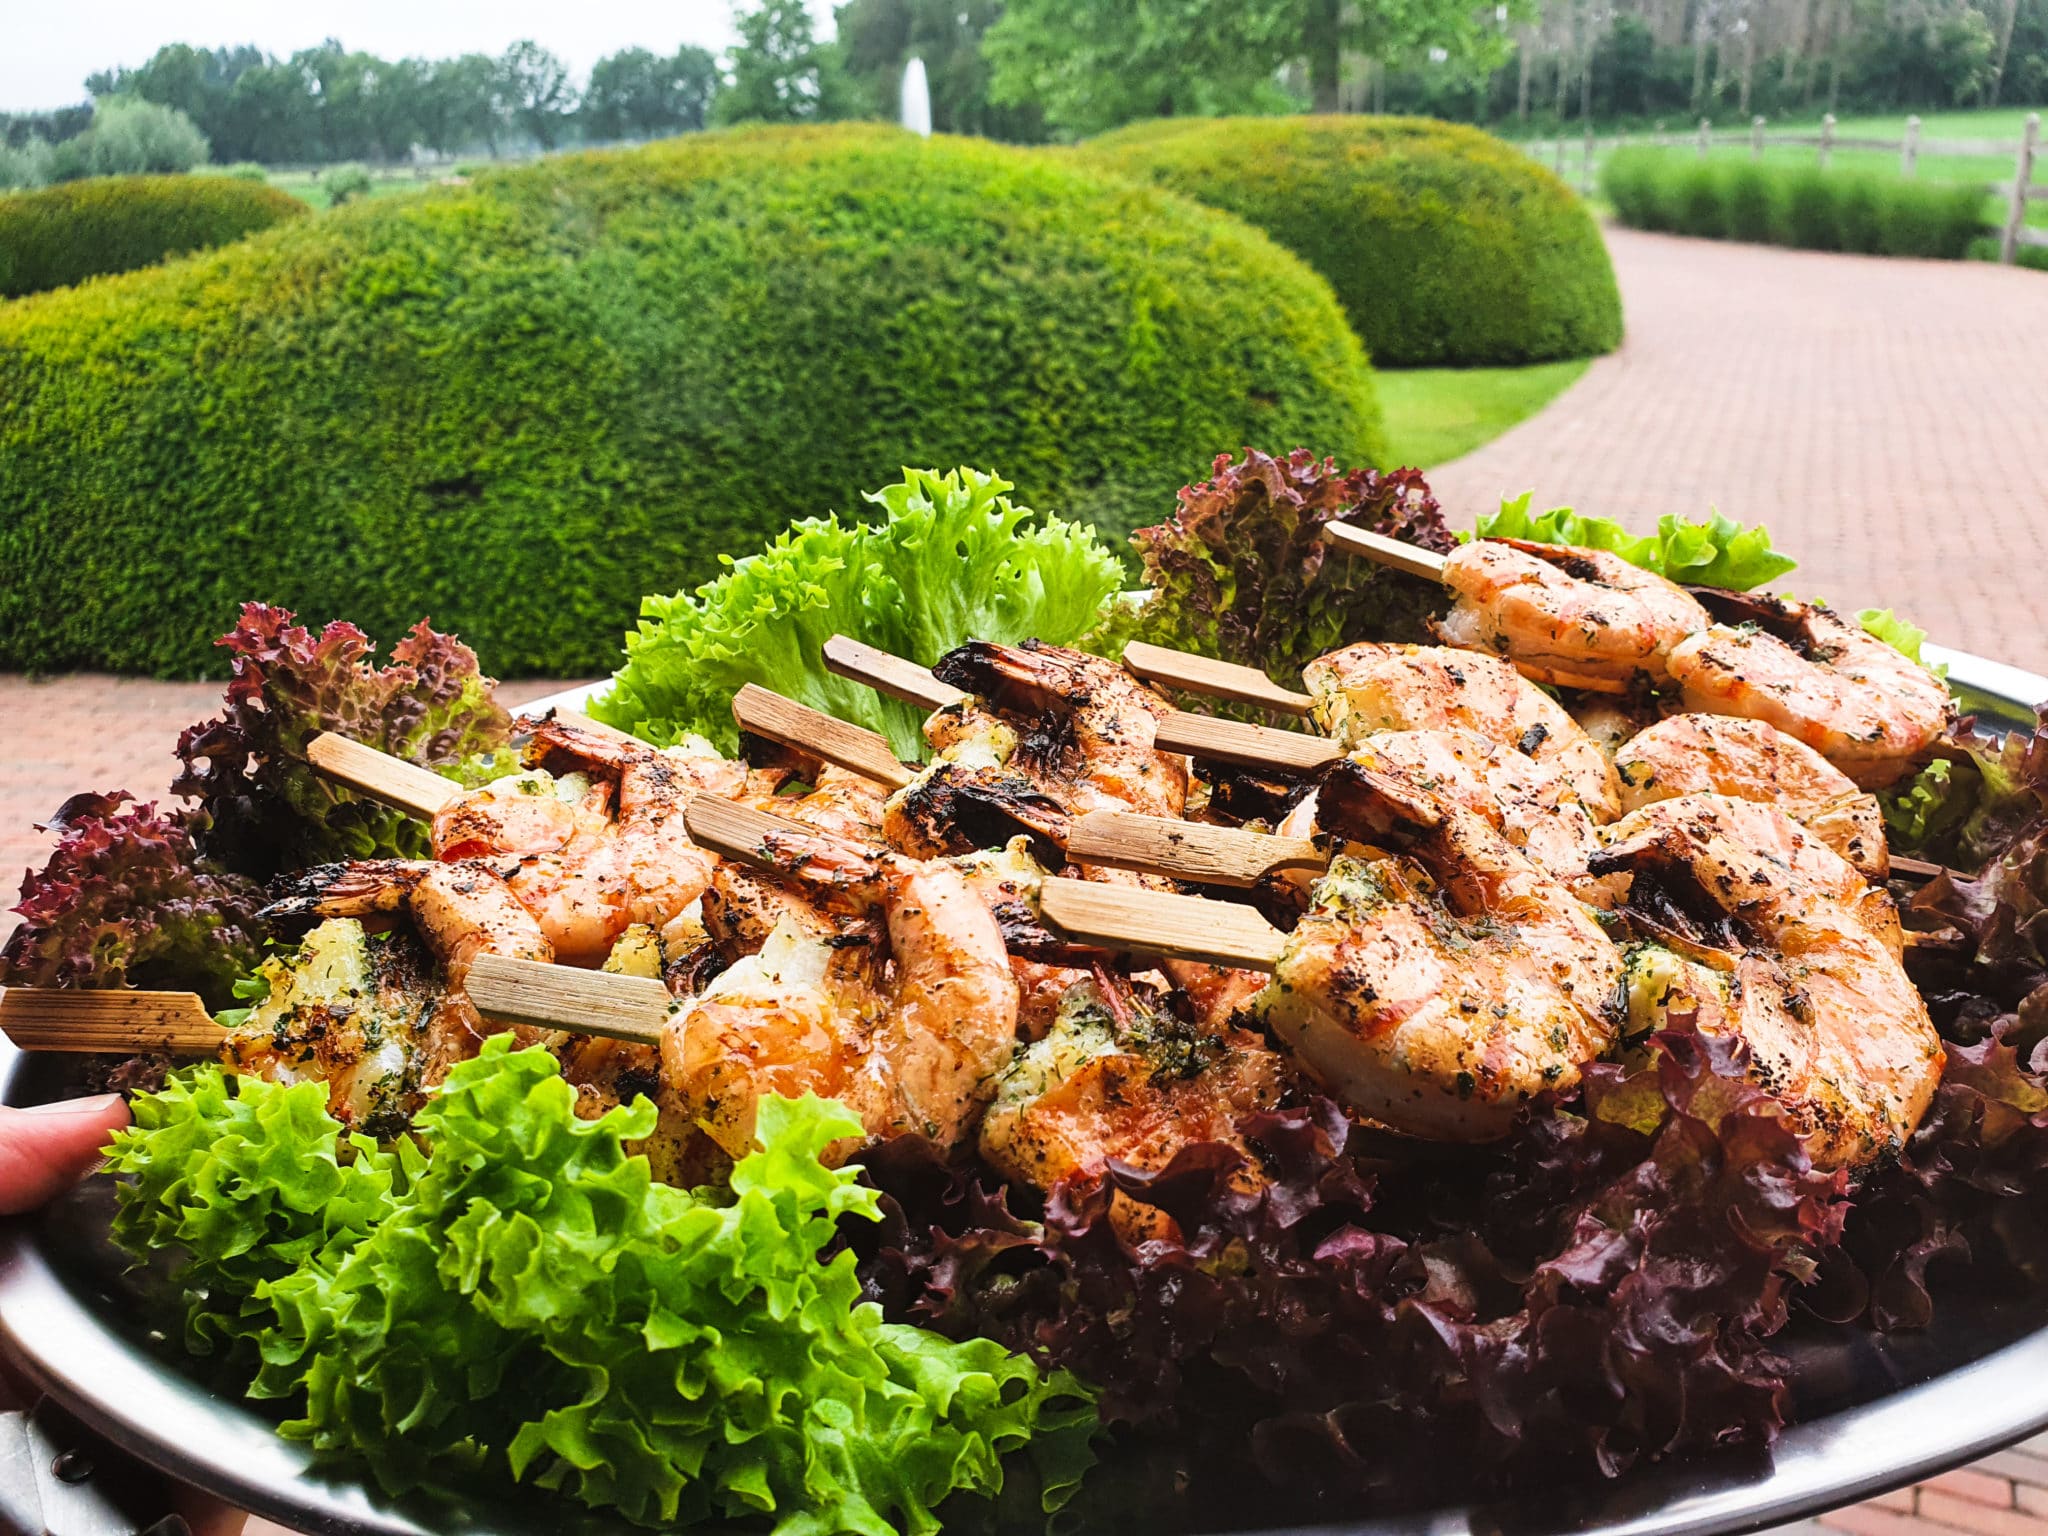 Cateringservice Bolsterbos mixed grill op locatie